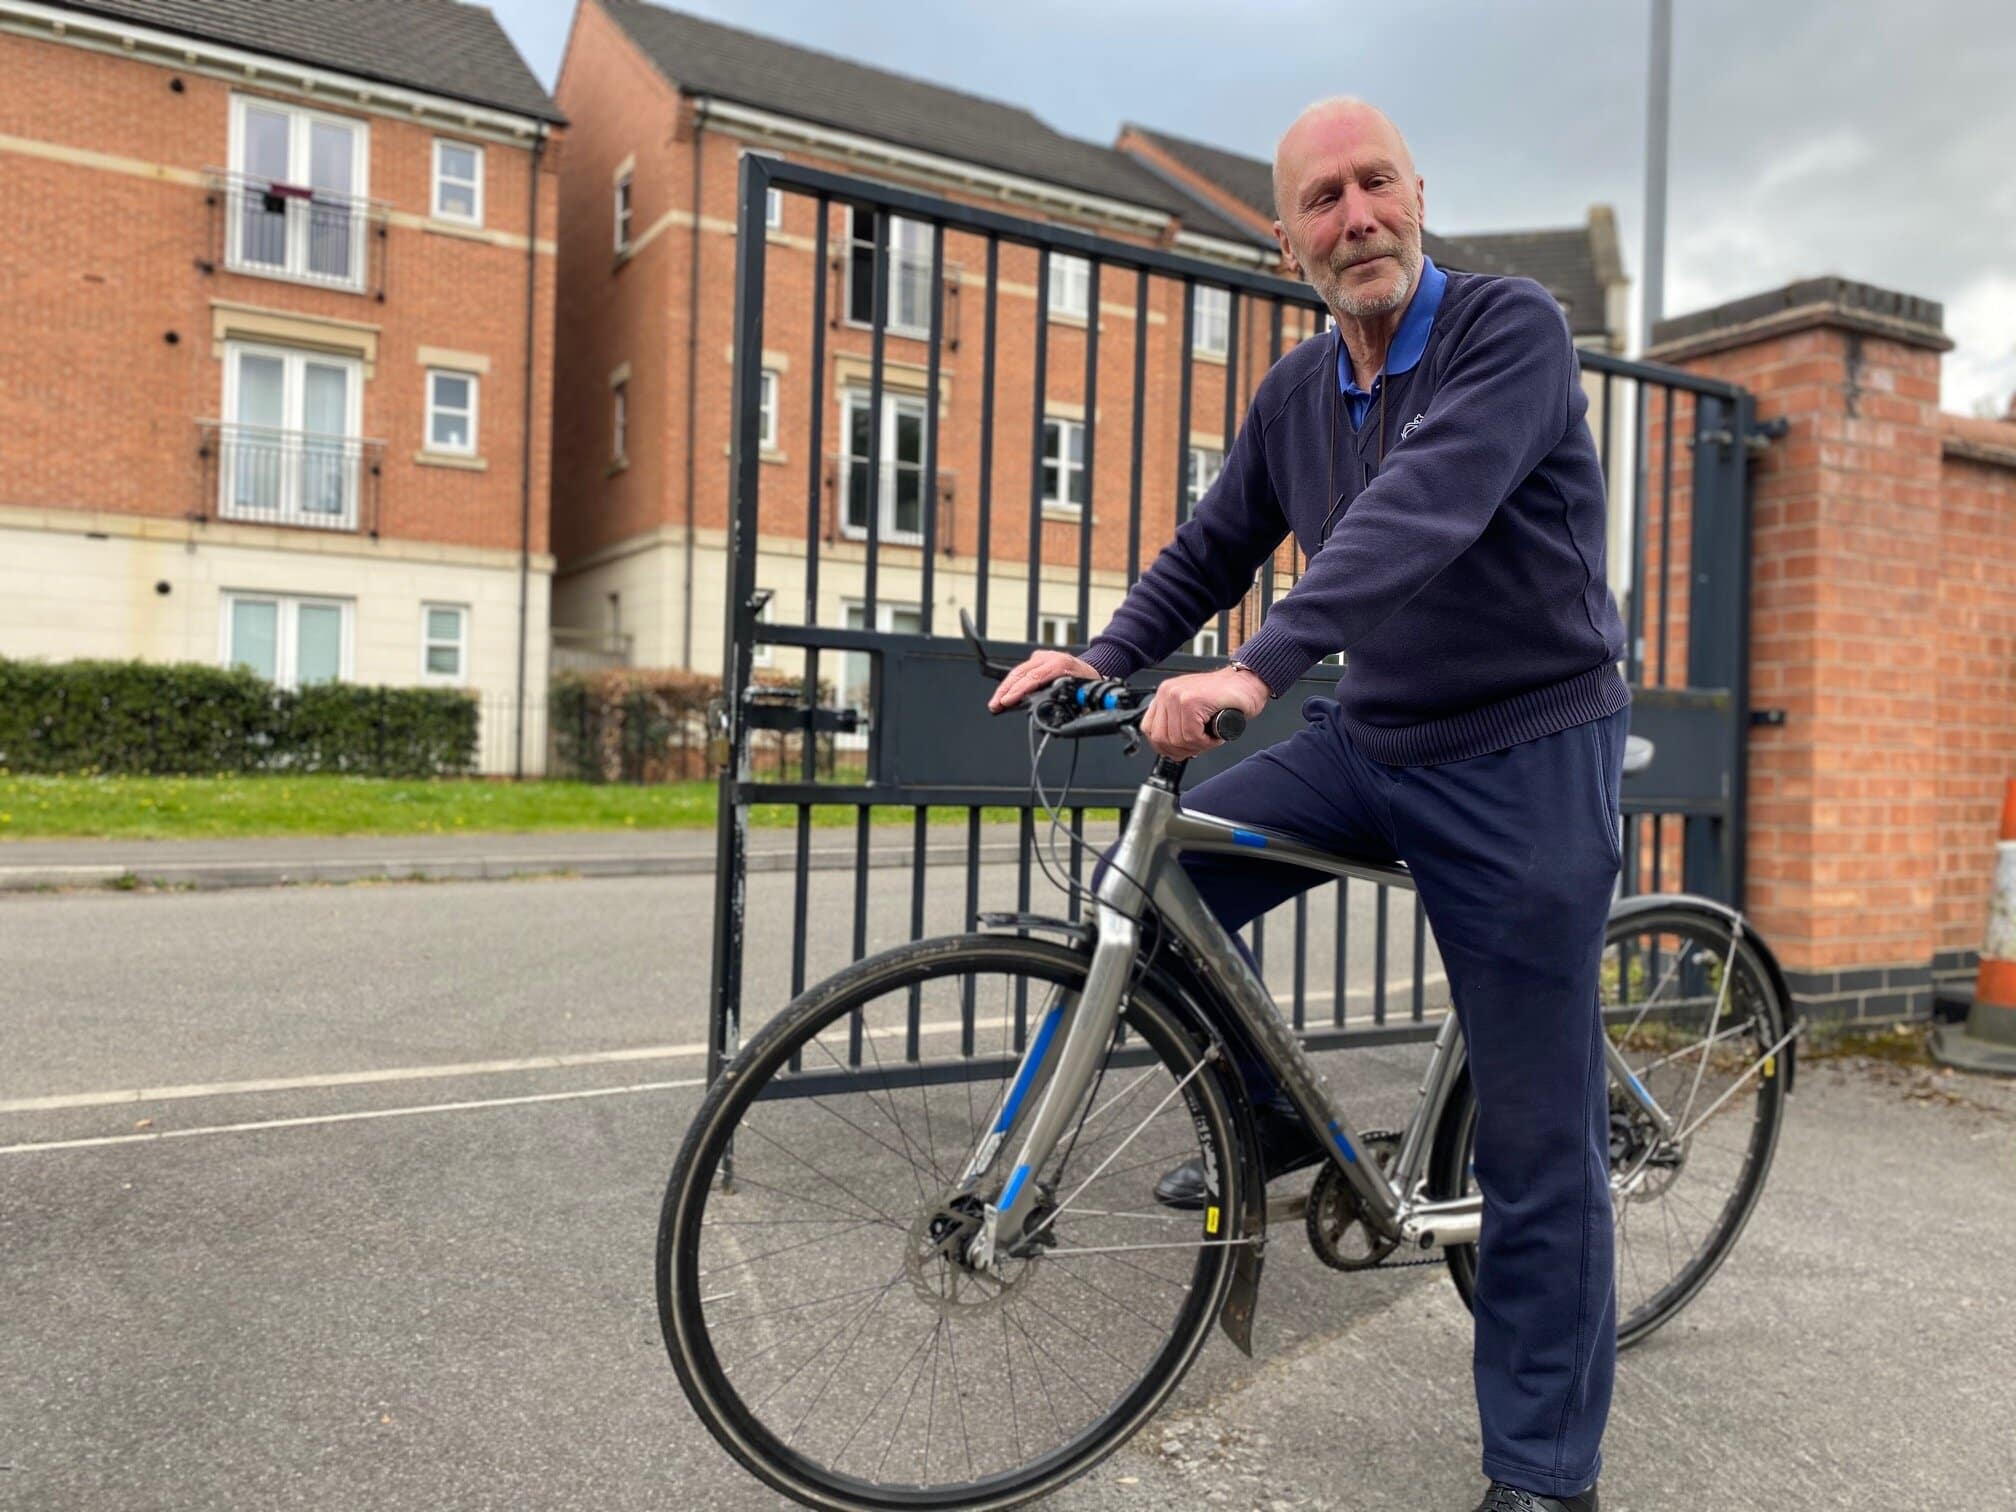 Bob Webb, 74, on his most recent bike that he uses to commute to work.